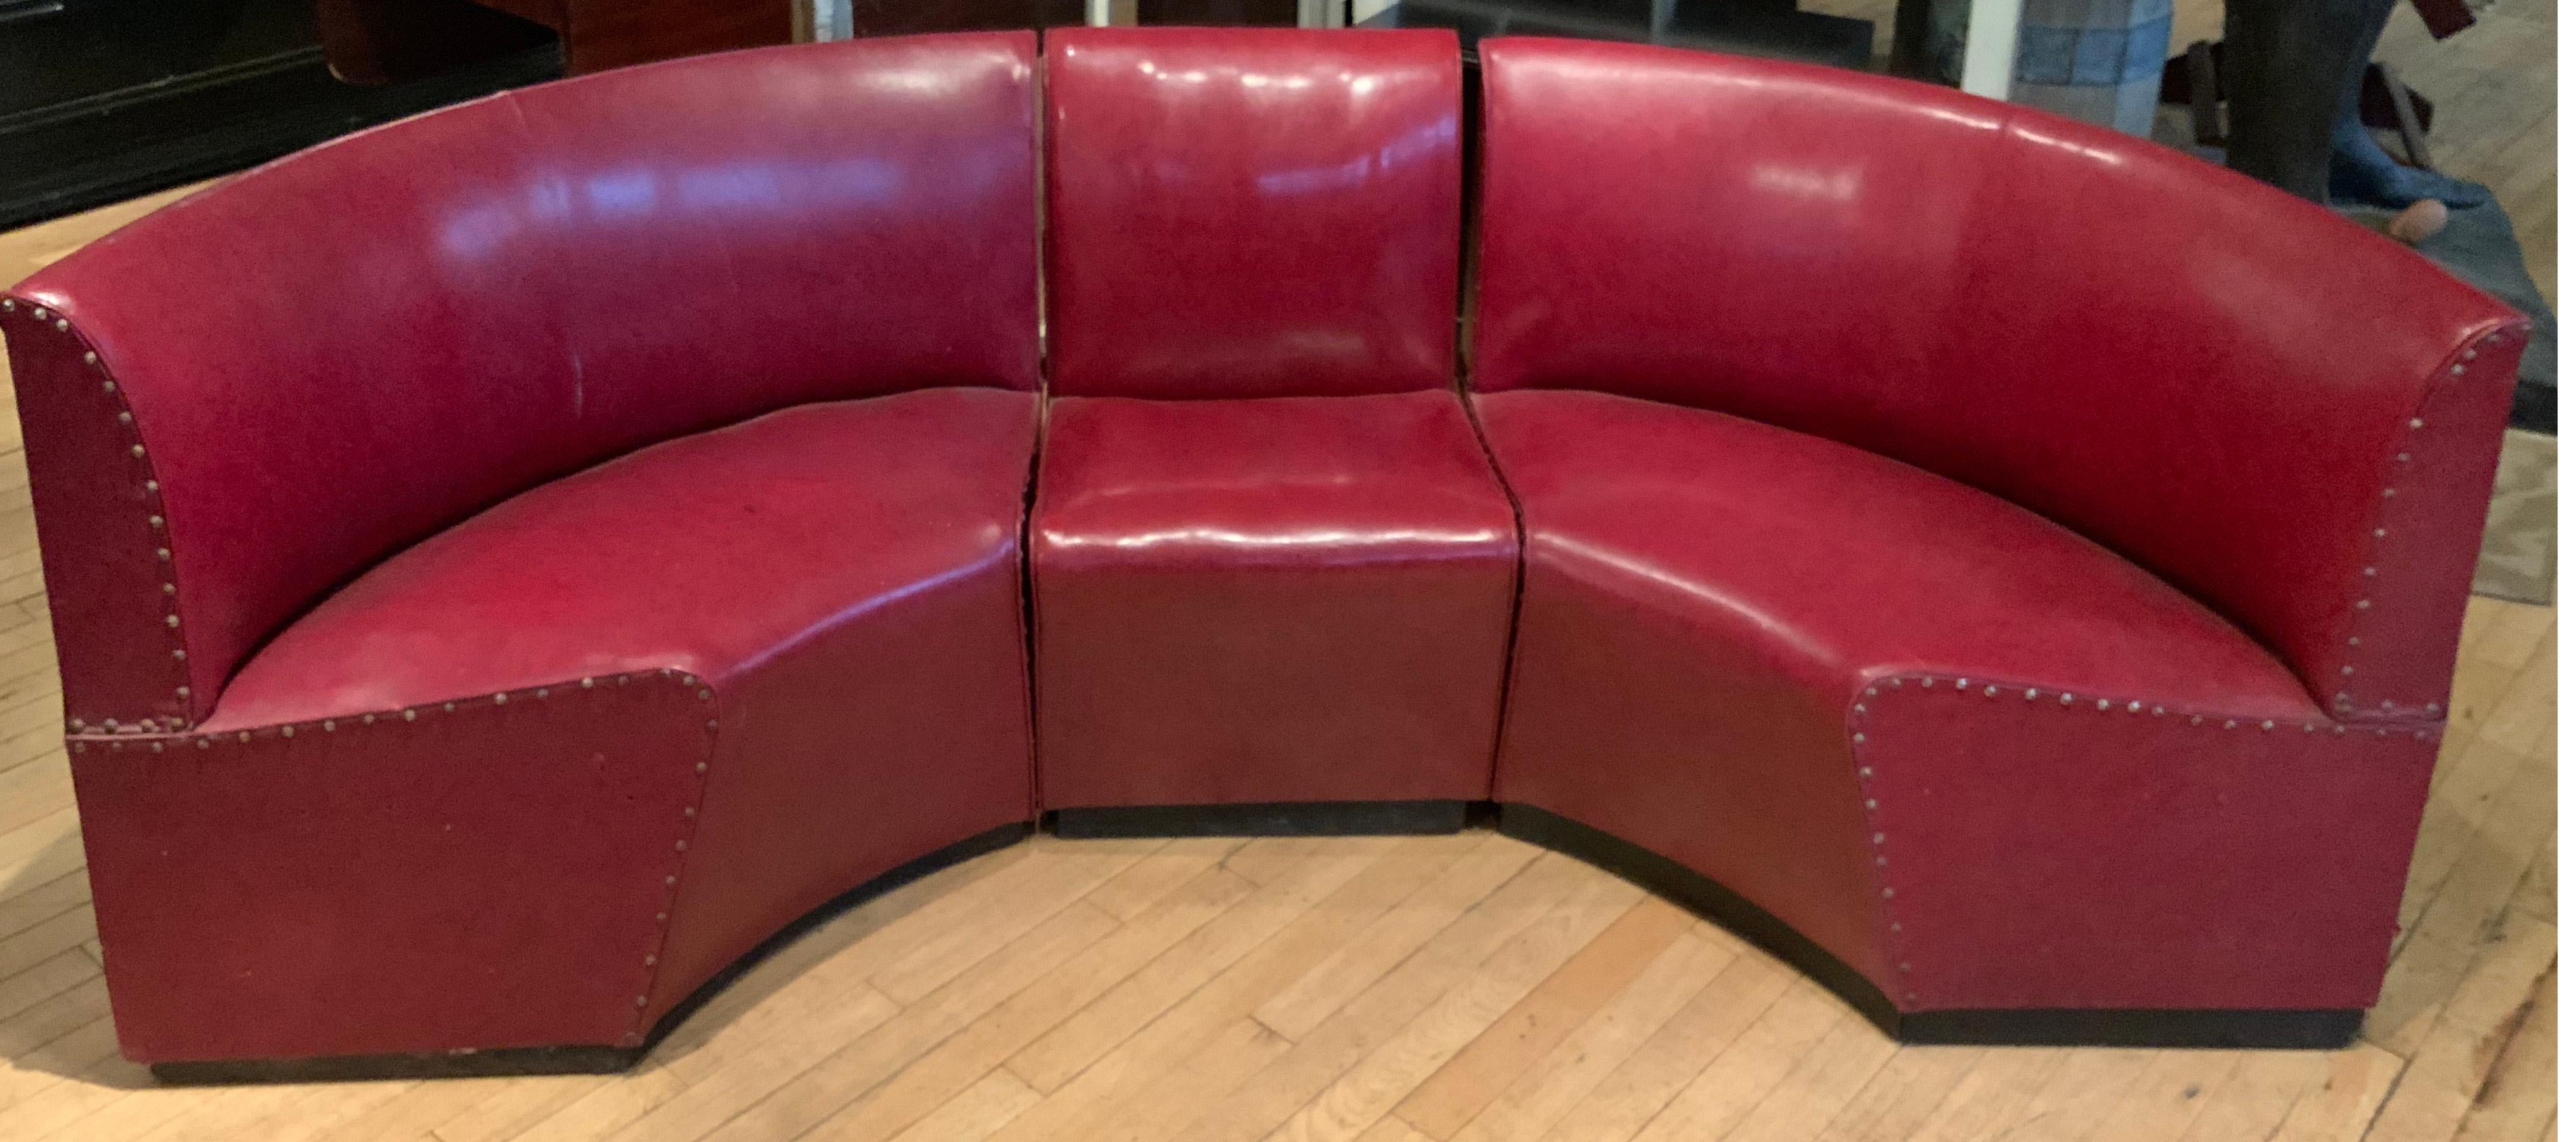 an unusual set of three pieces of curved sectional banquette seating by Art Chrome Company. designed with two curved sections and a single smaller straight piece, these can be used in a variety of spaces together, or also used separated around a